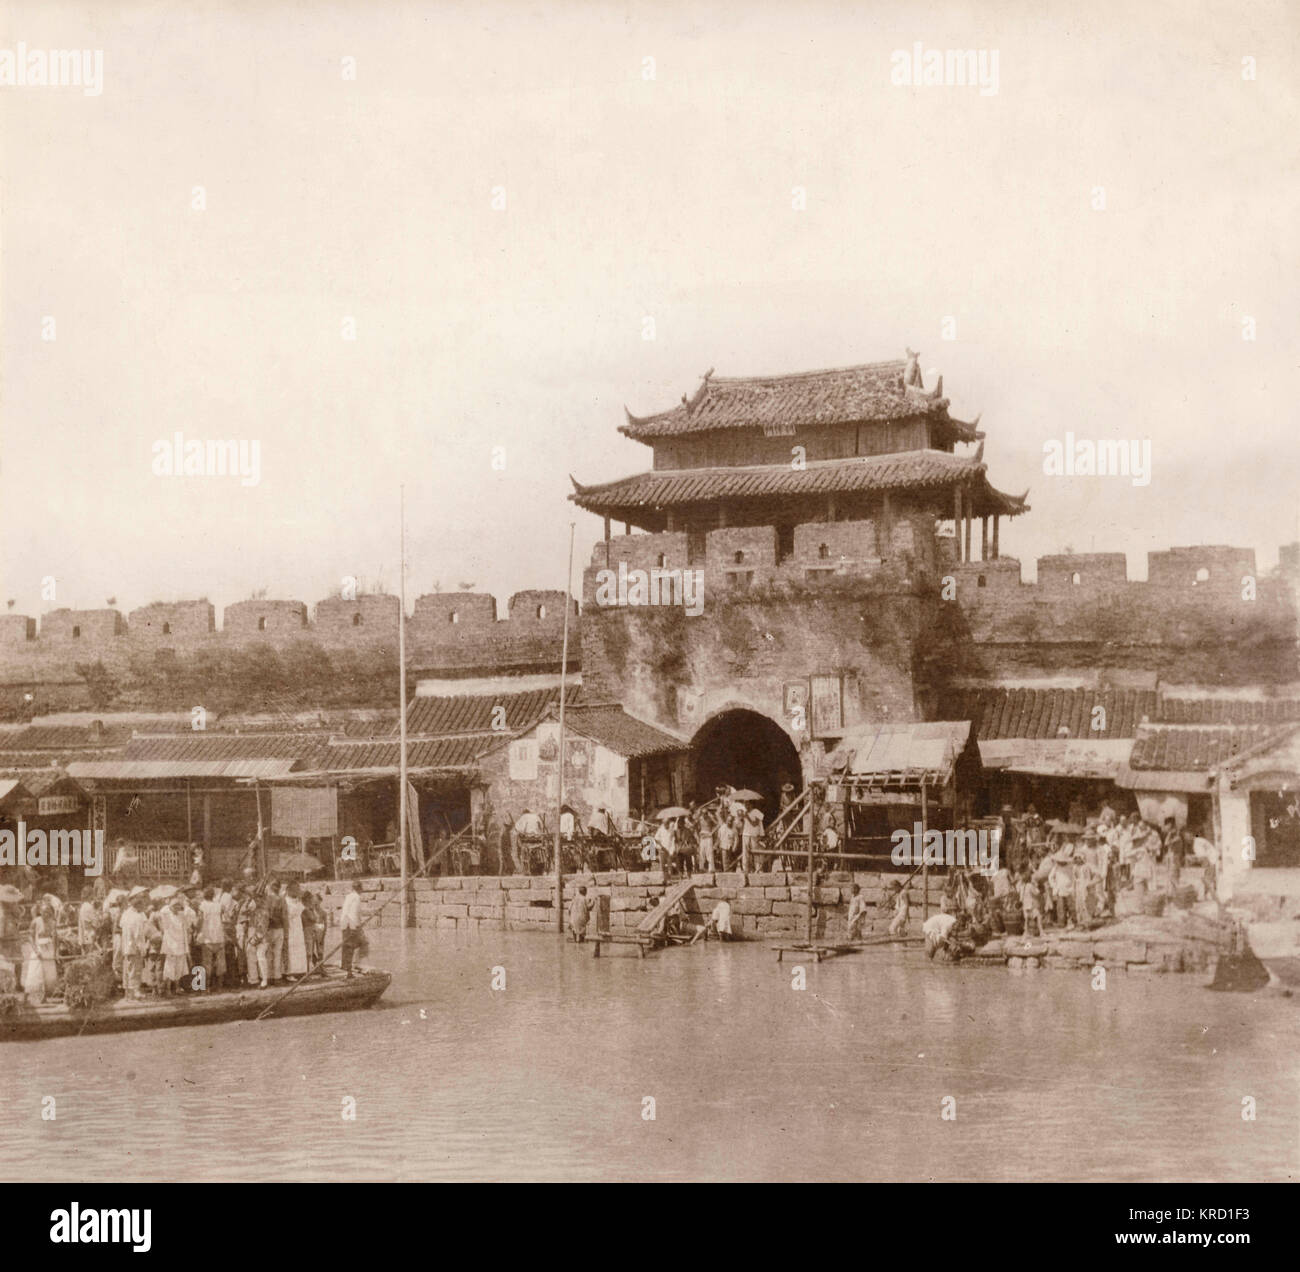 One of the main gates of Nanking, China, at the time that the city was captured by revolutionaries.  The Qing Dynasty was overthrown in October 1911, the last imperial dynasty of China, and Sun Yat Sen became President of the newly formed Republic of China (ROC), founded in 1912.       Date: circa 1911 Stock Photo